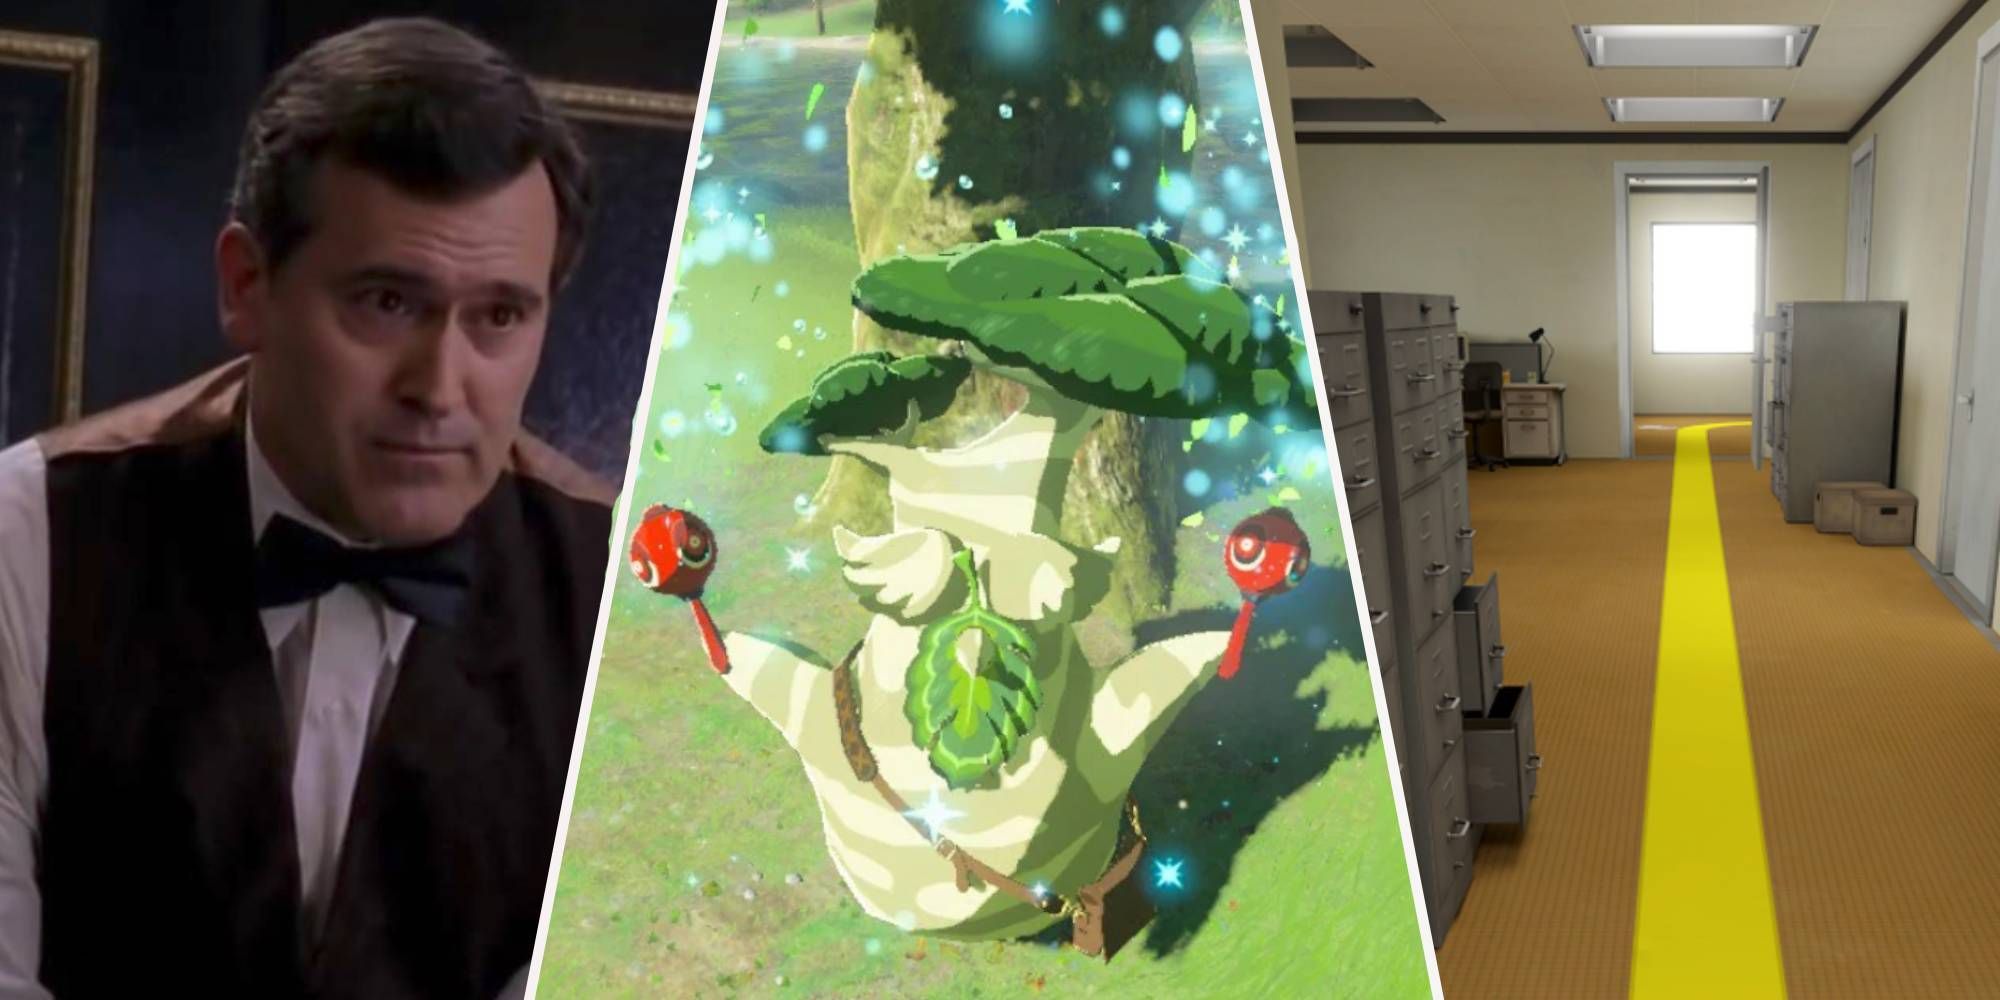 A feature image with Bruce Campbell from the Spiderman movies, a Korok, and the yellow line from Stanley Parable